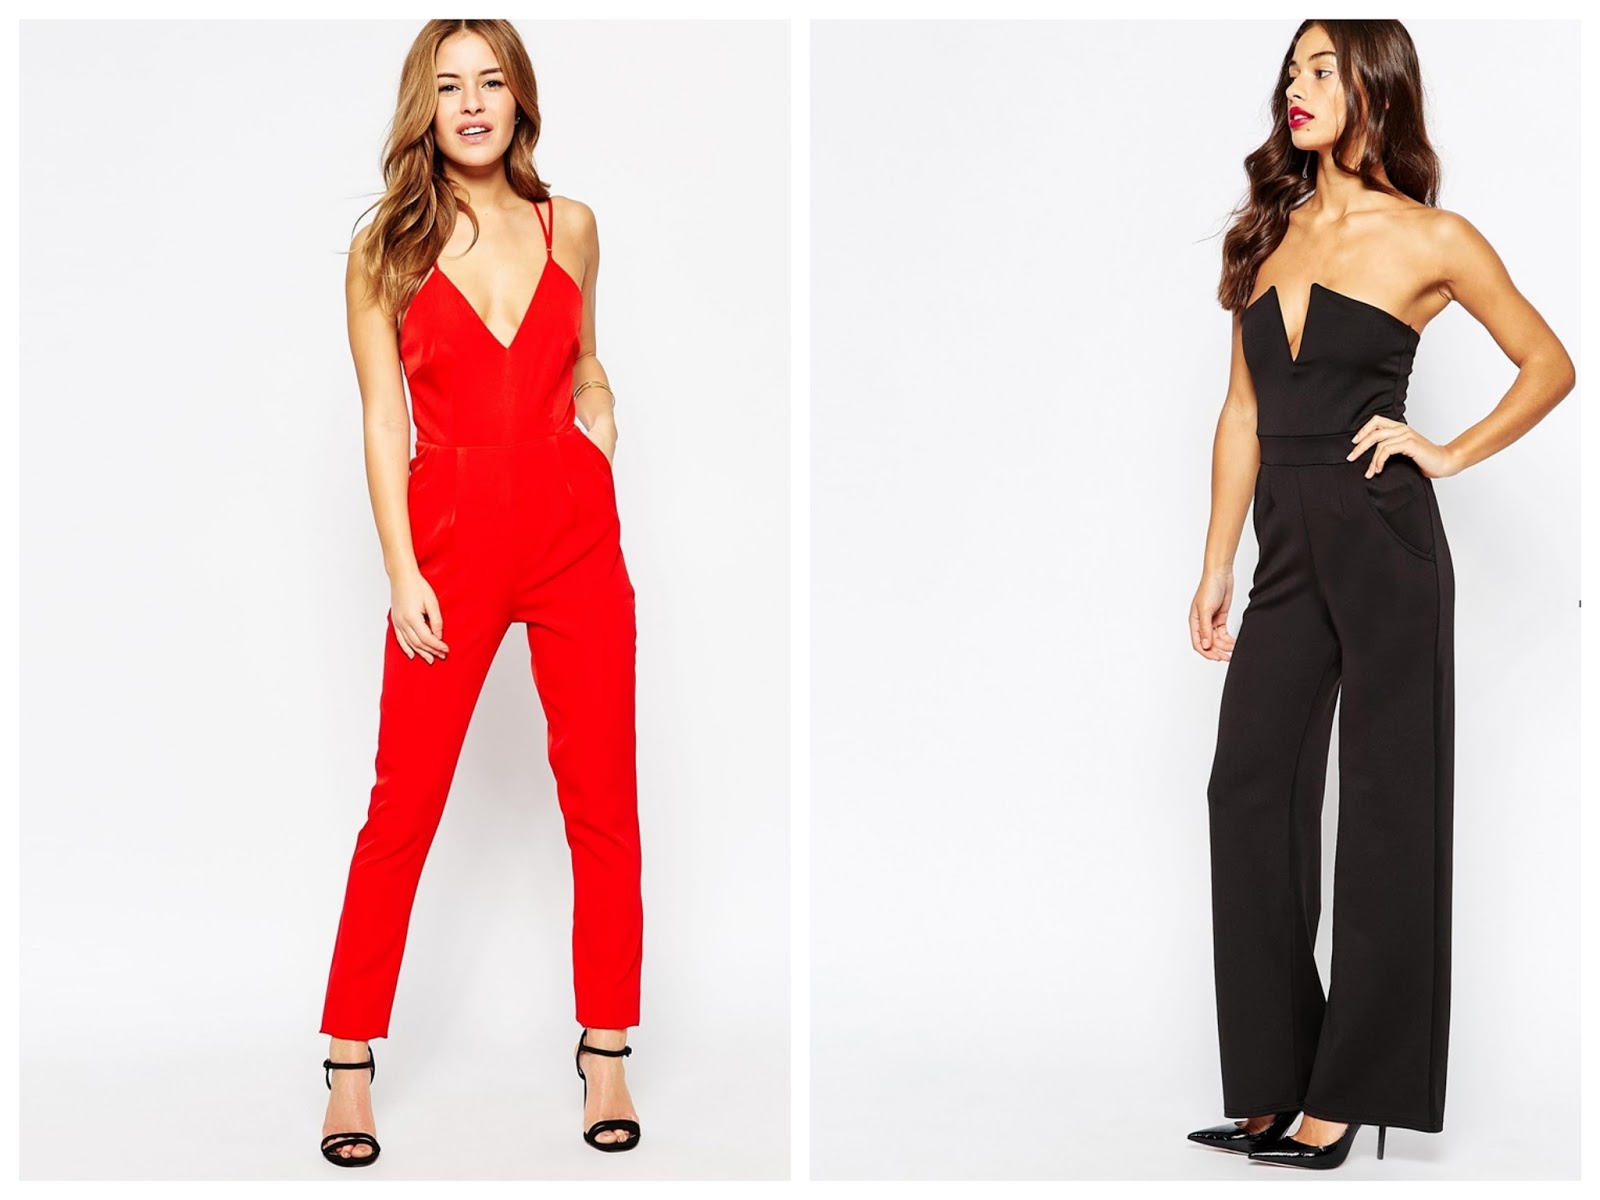 Christmas party looks: The jumpsuit